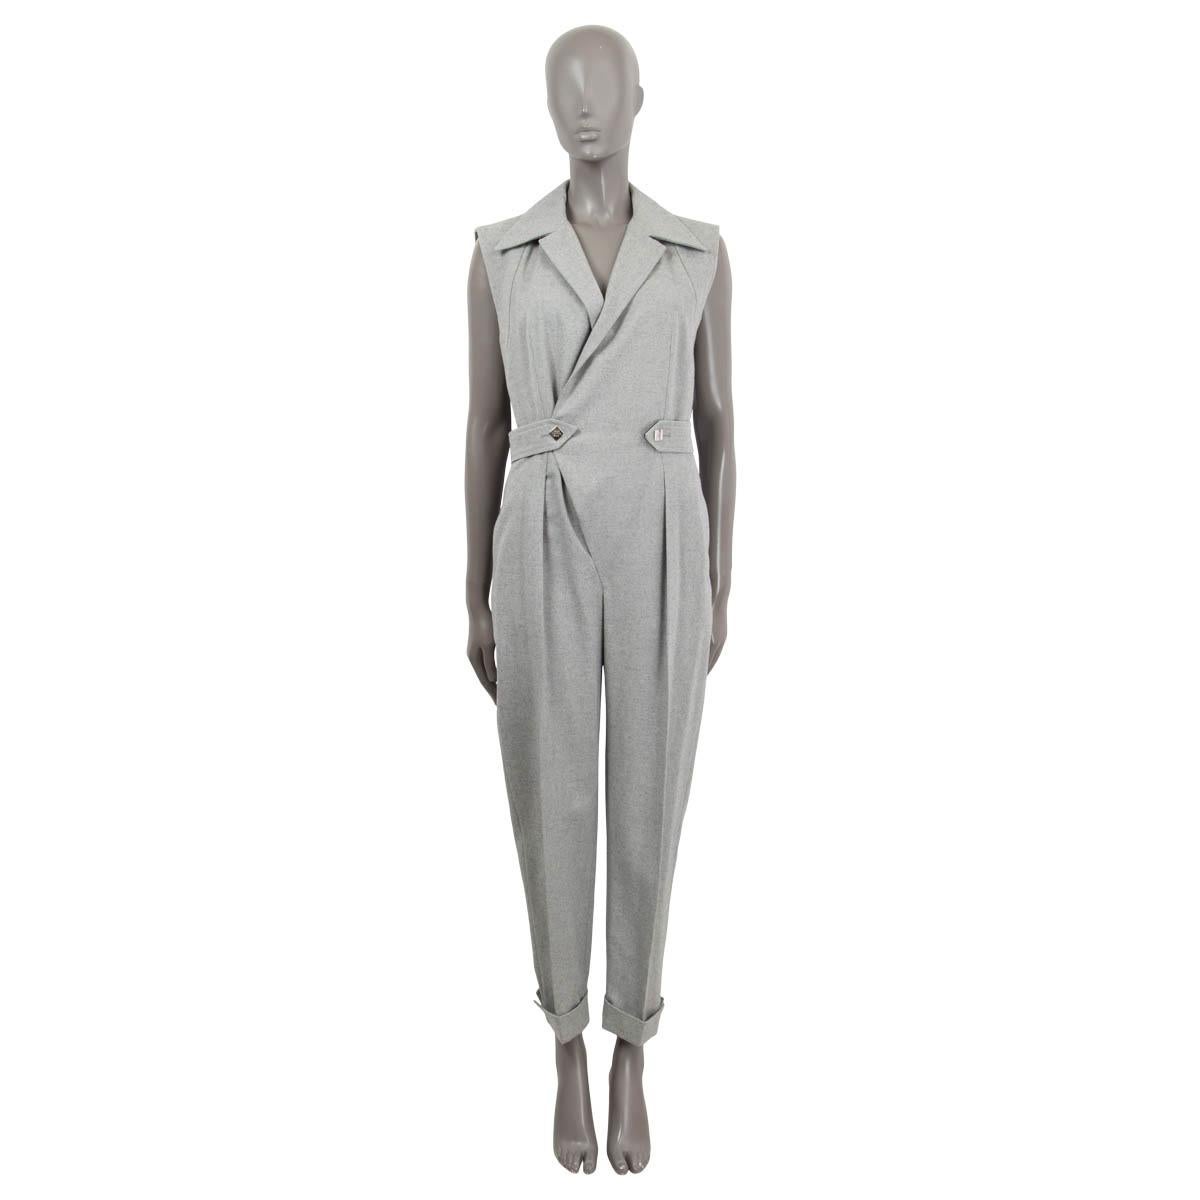 LOUIS VUITTON grey cashmere 2021 FLANNEL TAILORED SLEEVELESS Jumpsuit 38 S